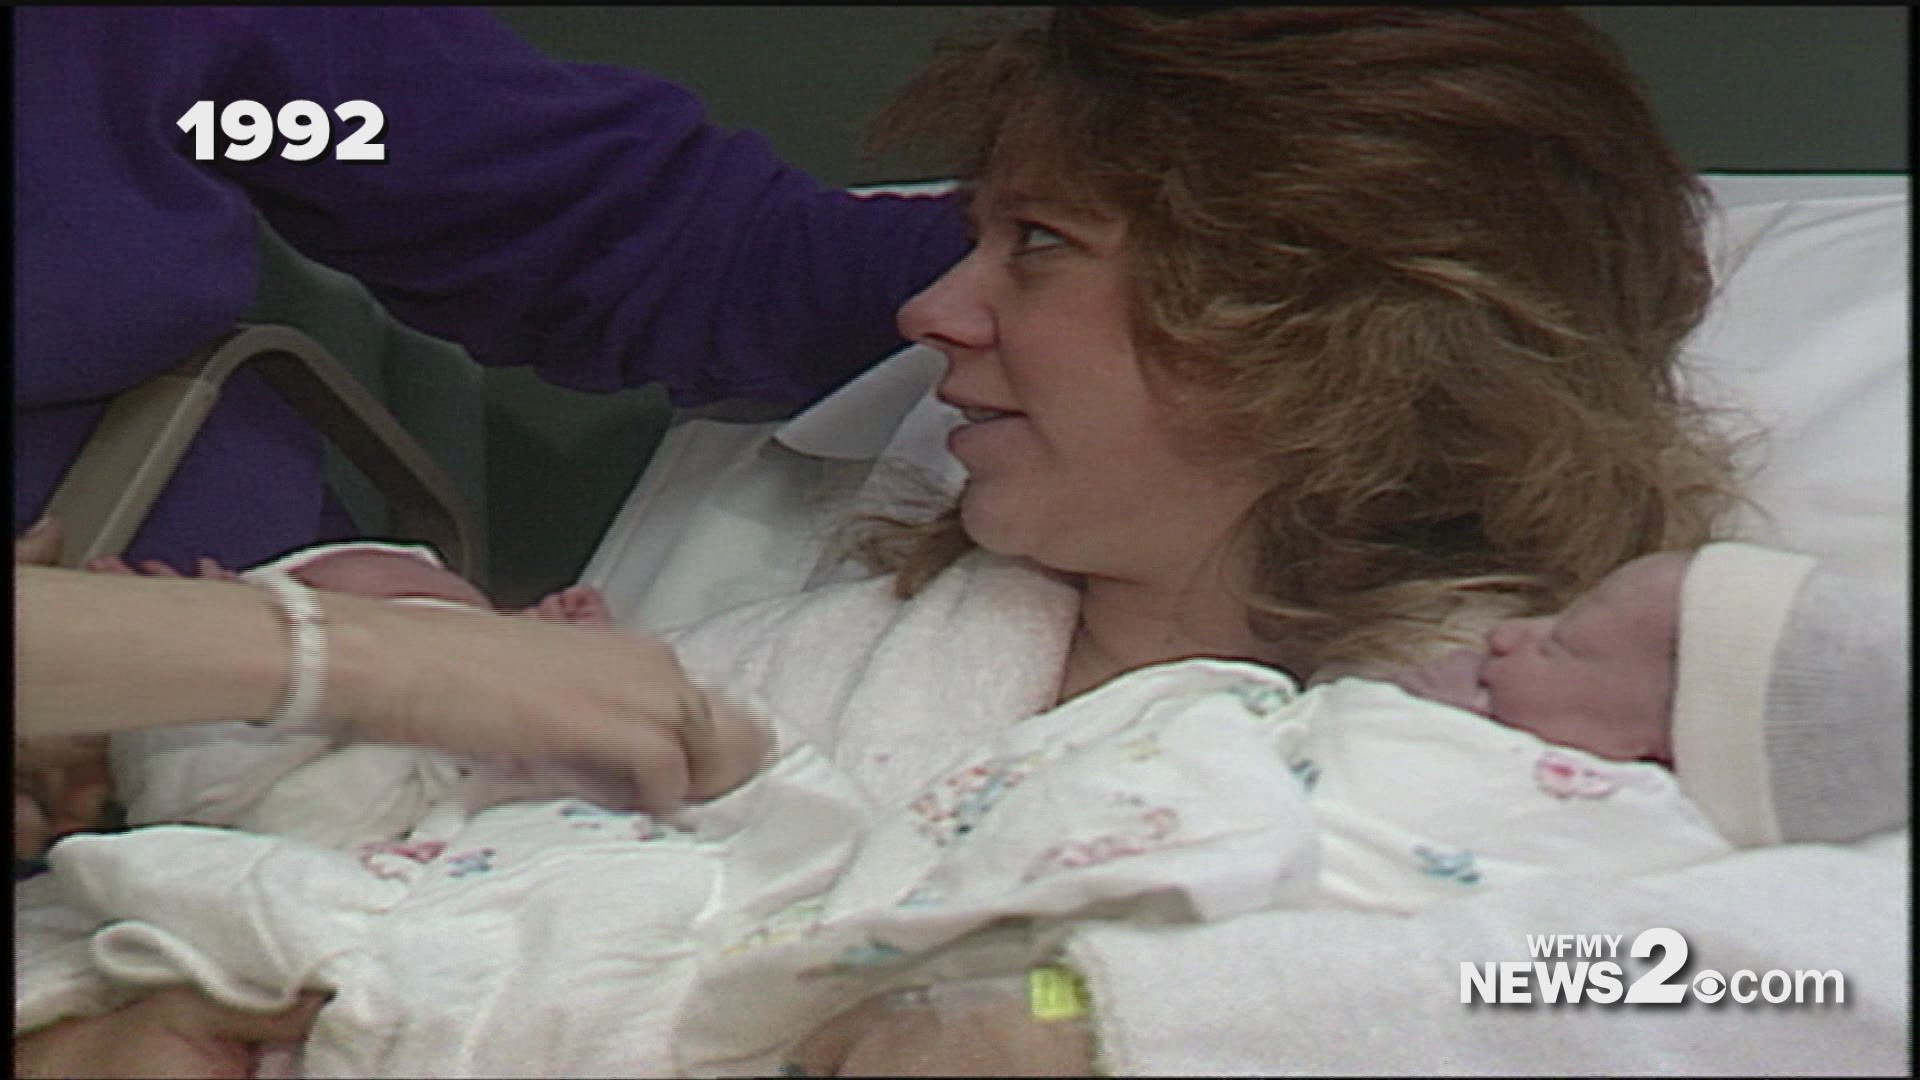 Lisa Pannell gave birth to her twin girls, Amber and Ashley, on February 29, 1992.